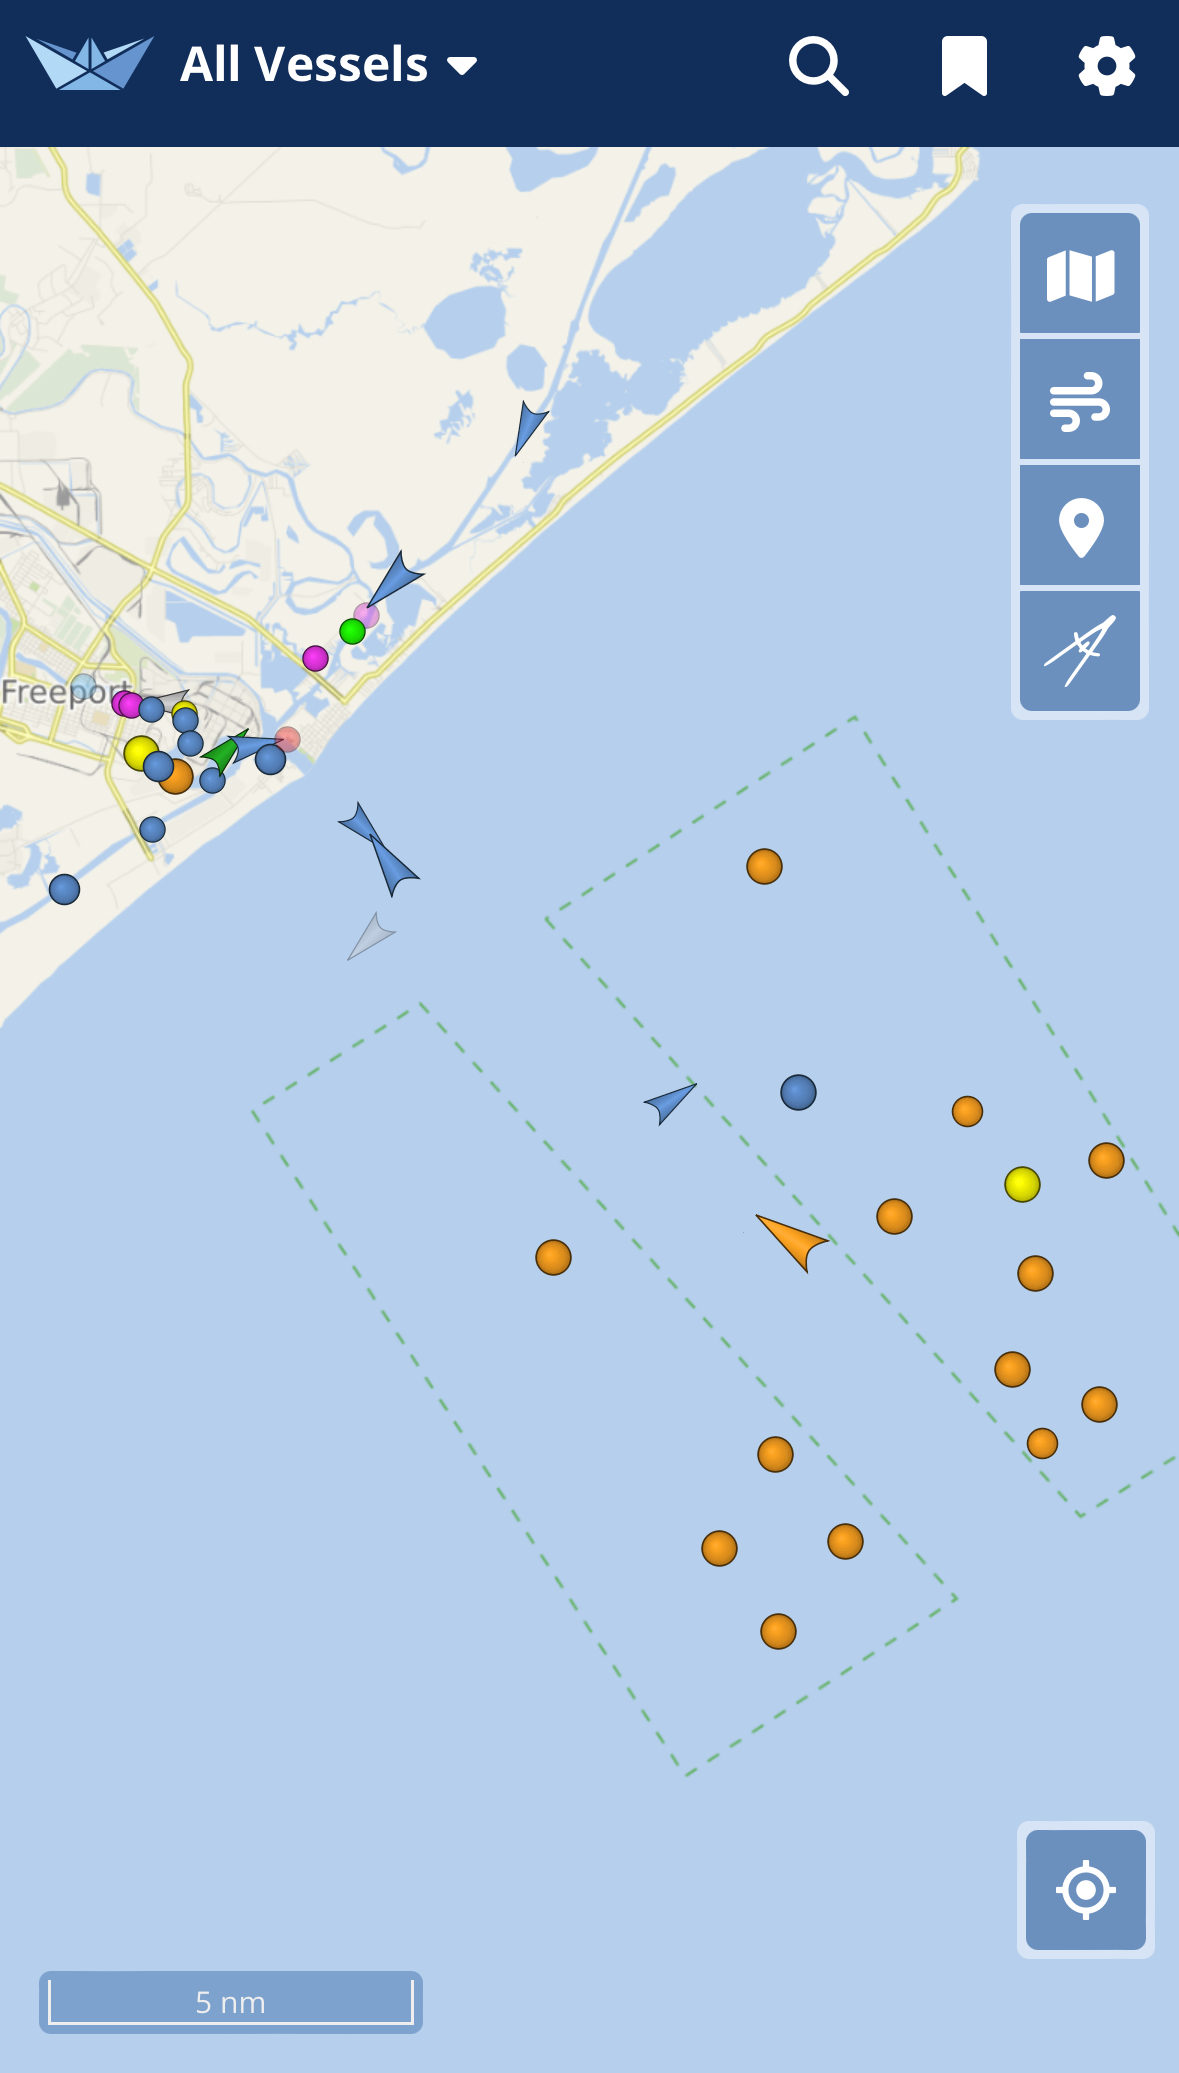 Tankers Waiting Offshore Freeport